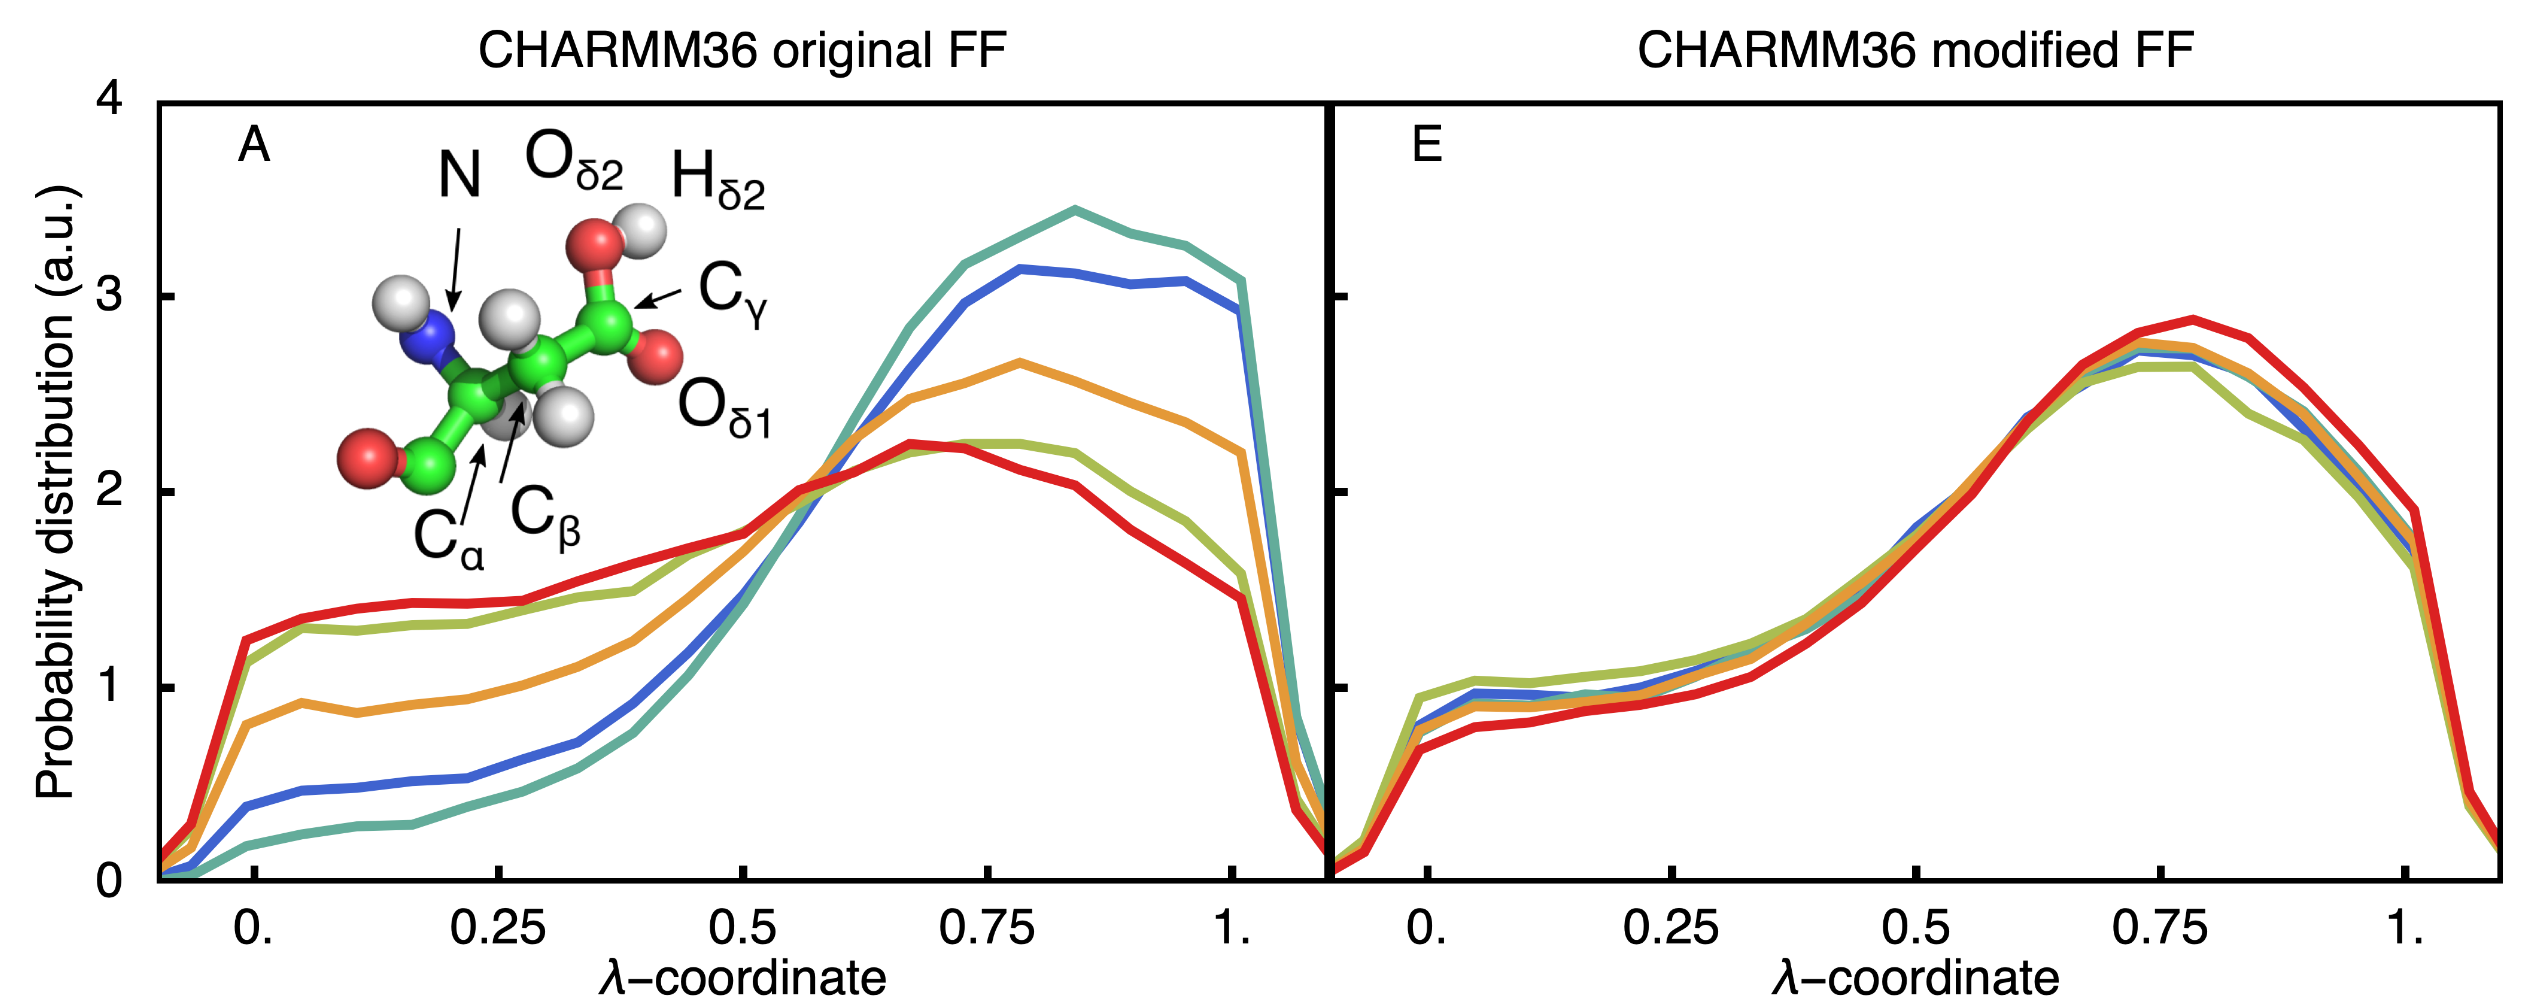 Distributions of the λ-coordinate (A, E) and dihedrals (B-D, F-H) in constant pH MD simulation of Asp with the original (A-D) and modified CHARMM36m (E-H) force field